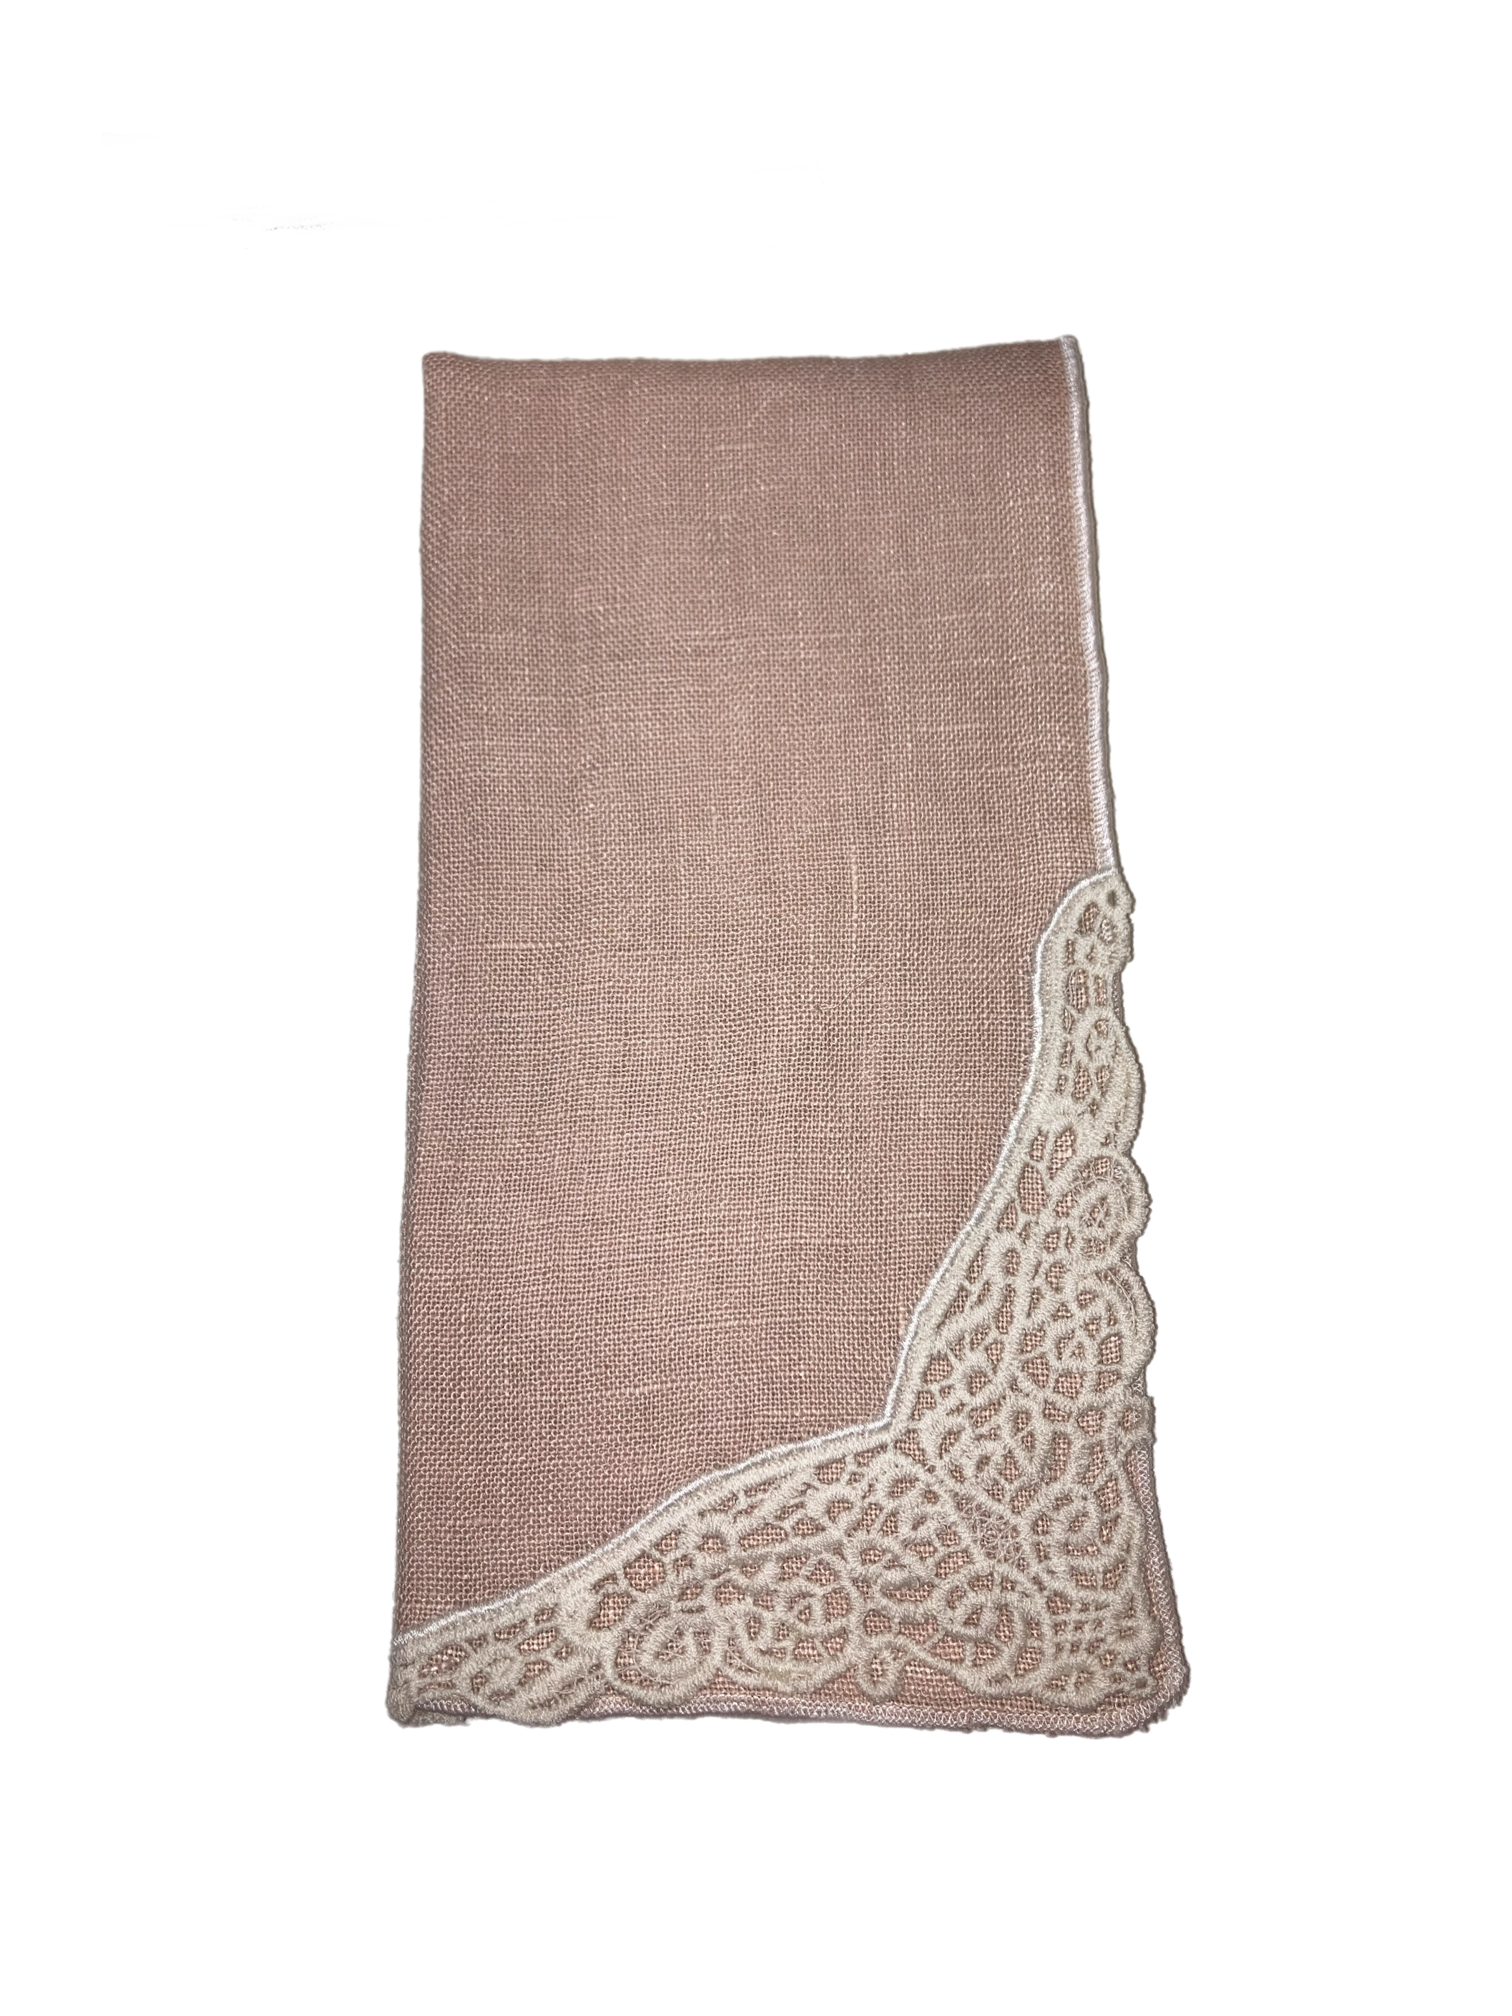 April Cornell Versailles Linen Napkin - Pink, INDIVIDUALLY SOLD